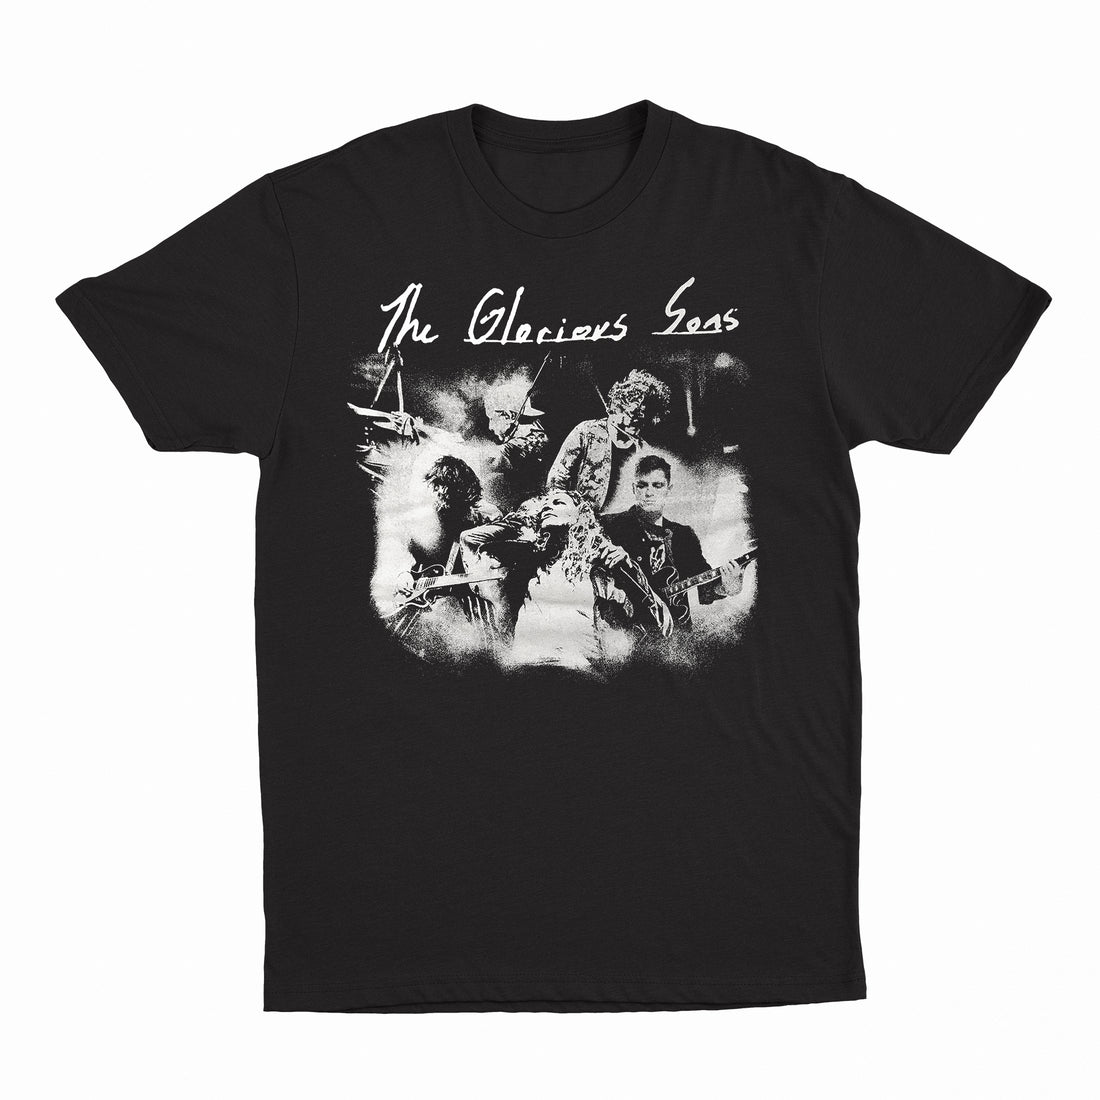 The Glorious Sons - Little Prison City Live - Black Tee